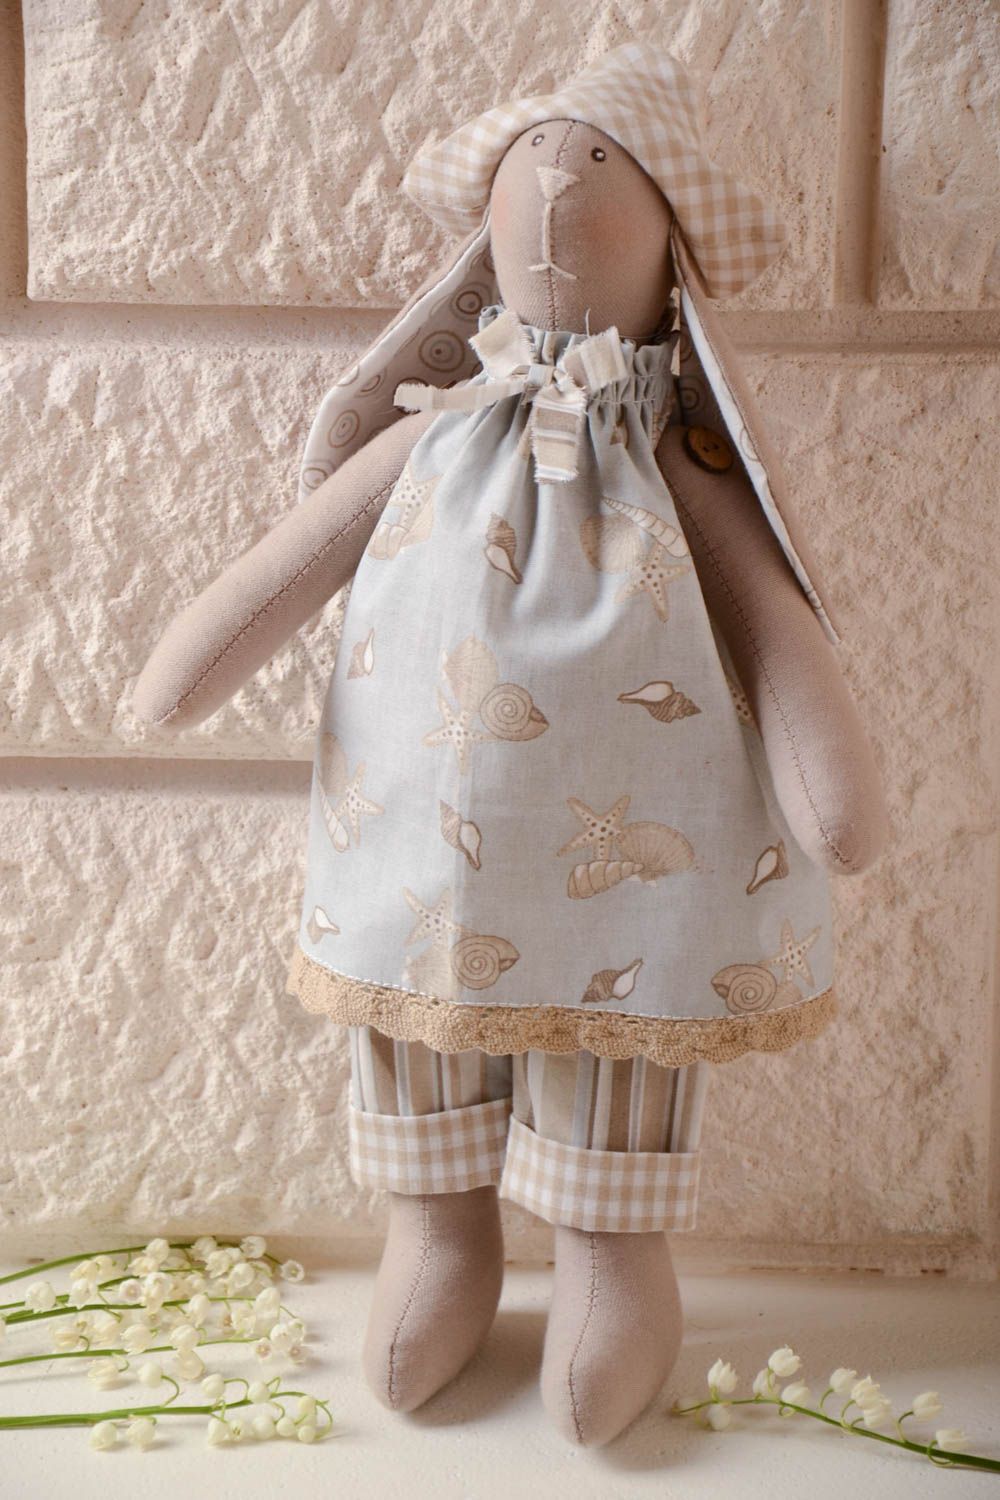 Handmade soft toy sewn of cotton fabric rabbit with long ears in hat and dress photo 1